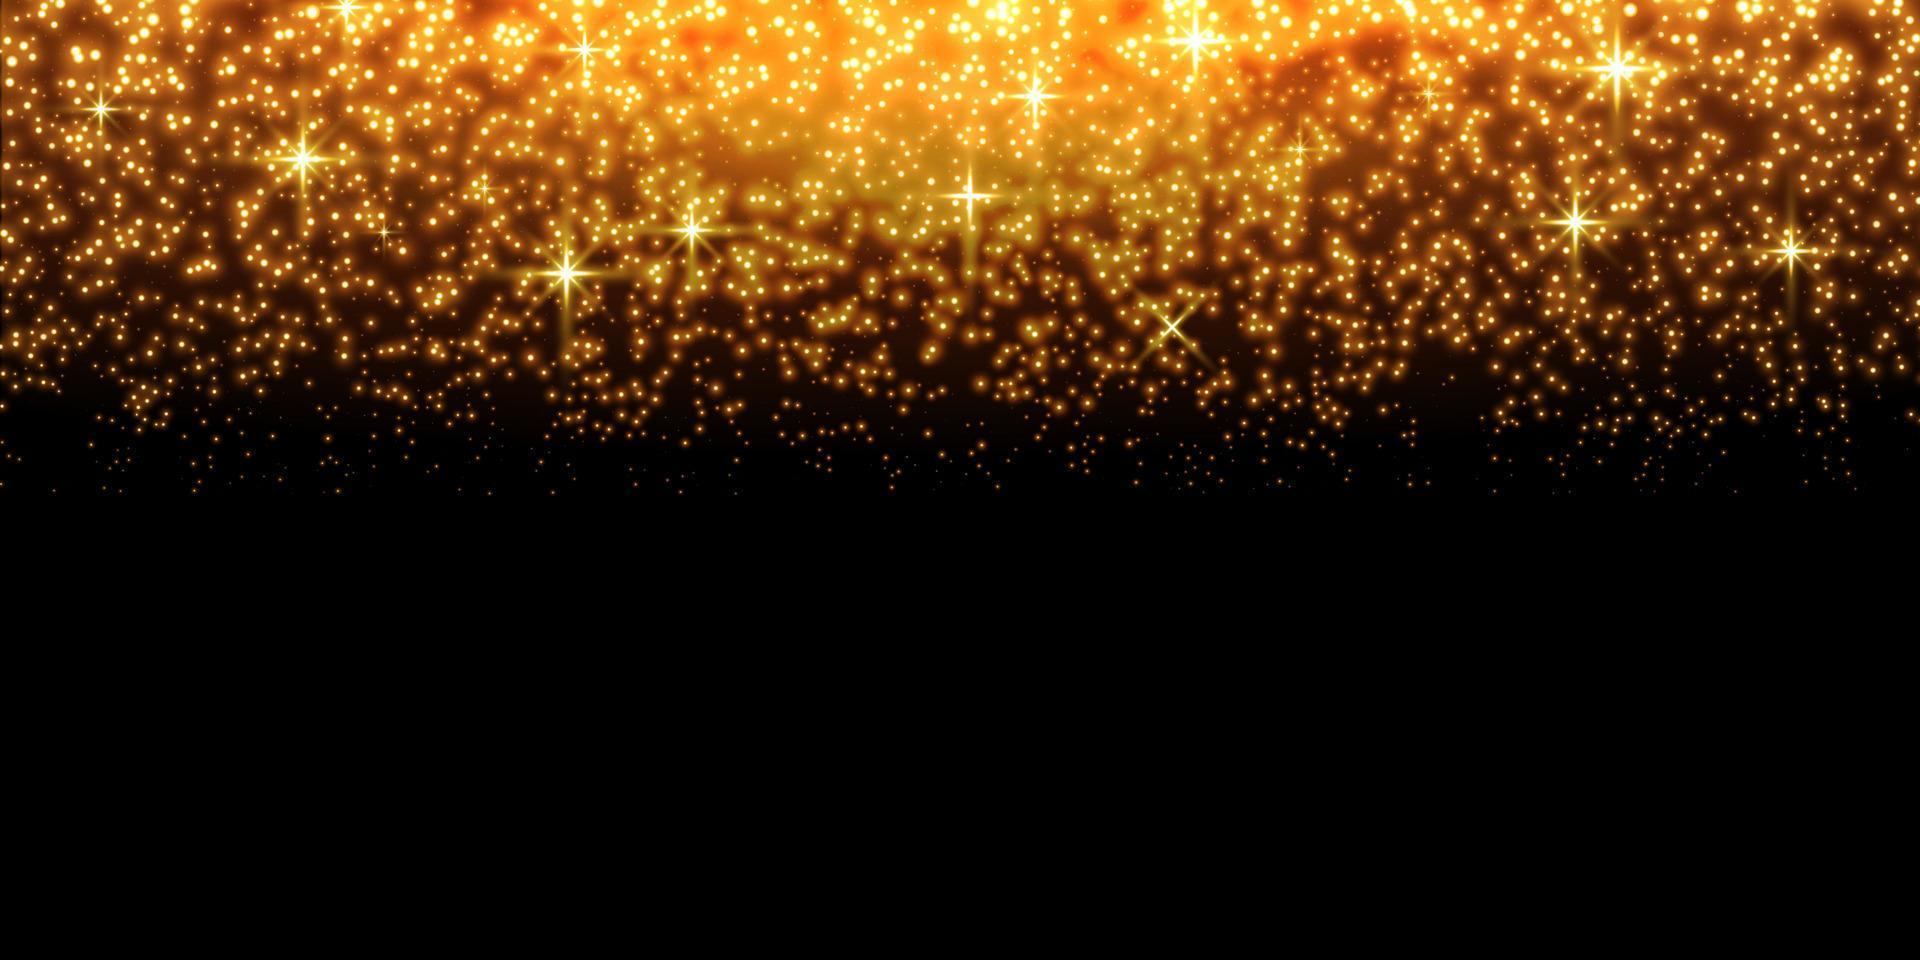 Gold glittering dots, sparkles, particles and stars on a black background. Abstract light effect. Gold luminous points. Vector illustration.